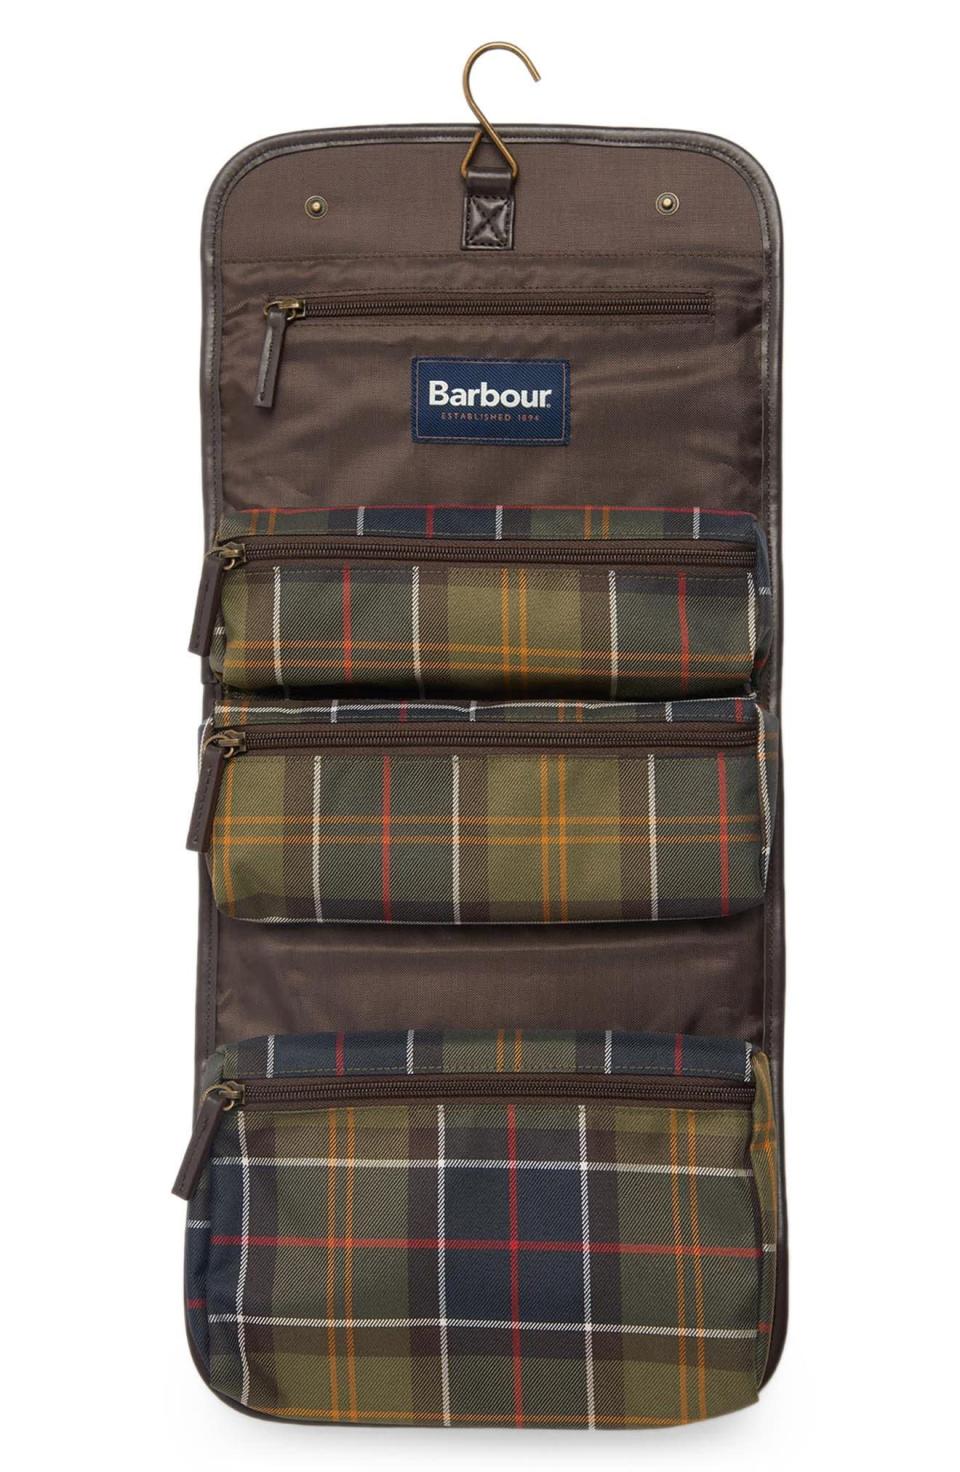 <p><strong>Barbour</strong></p><p>nordstrom.com</p><p><strong>$70.00</strong></p><p><a href="https://go.redirectingat.com?id=74968X1596630&url=https%3A%2F%2Fwww.nordstrom.com%2Fs%2Fbarbour-tartan-hanging-dopp-kit%2F6470893&sref=https%3A%2F%2Fwww.townandcountrymag.com%2Fstyle%2Fbeauty-products%2Fg40195370%2Fbest-toiletry-bags-women%2F" rel="nofollow noopener" target="_blank" data-ylk="slk:Shop Now" class="link ">Shop Now</a></p><p>Whether you're heading to Scotland this summer or are just a fan of Barbour's signature tartan prints, this hanging dopp kit makes for a worthy travel splurge. Not only does it hang on a bathroom door for access to all your essentials, but it also folds up neatly for easy packing.</p>